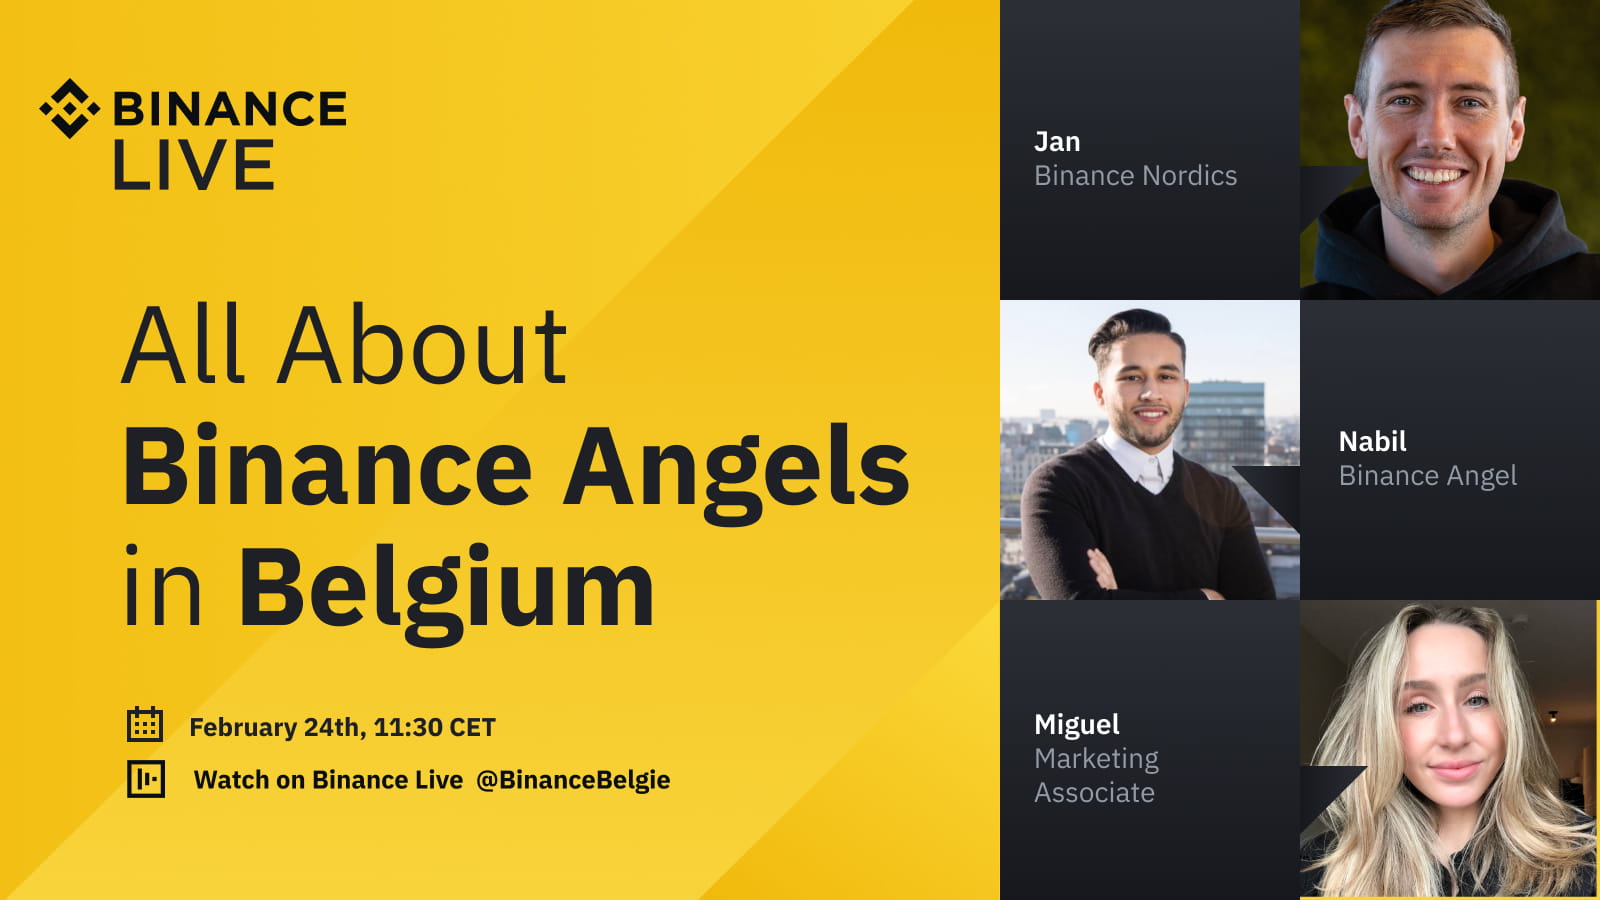 All about Binance Angels in Belgium